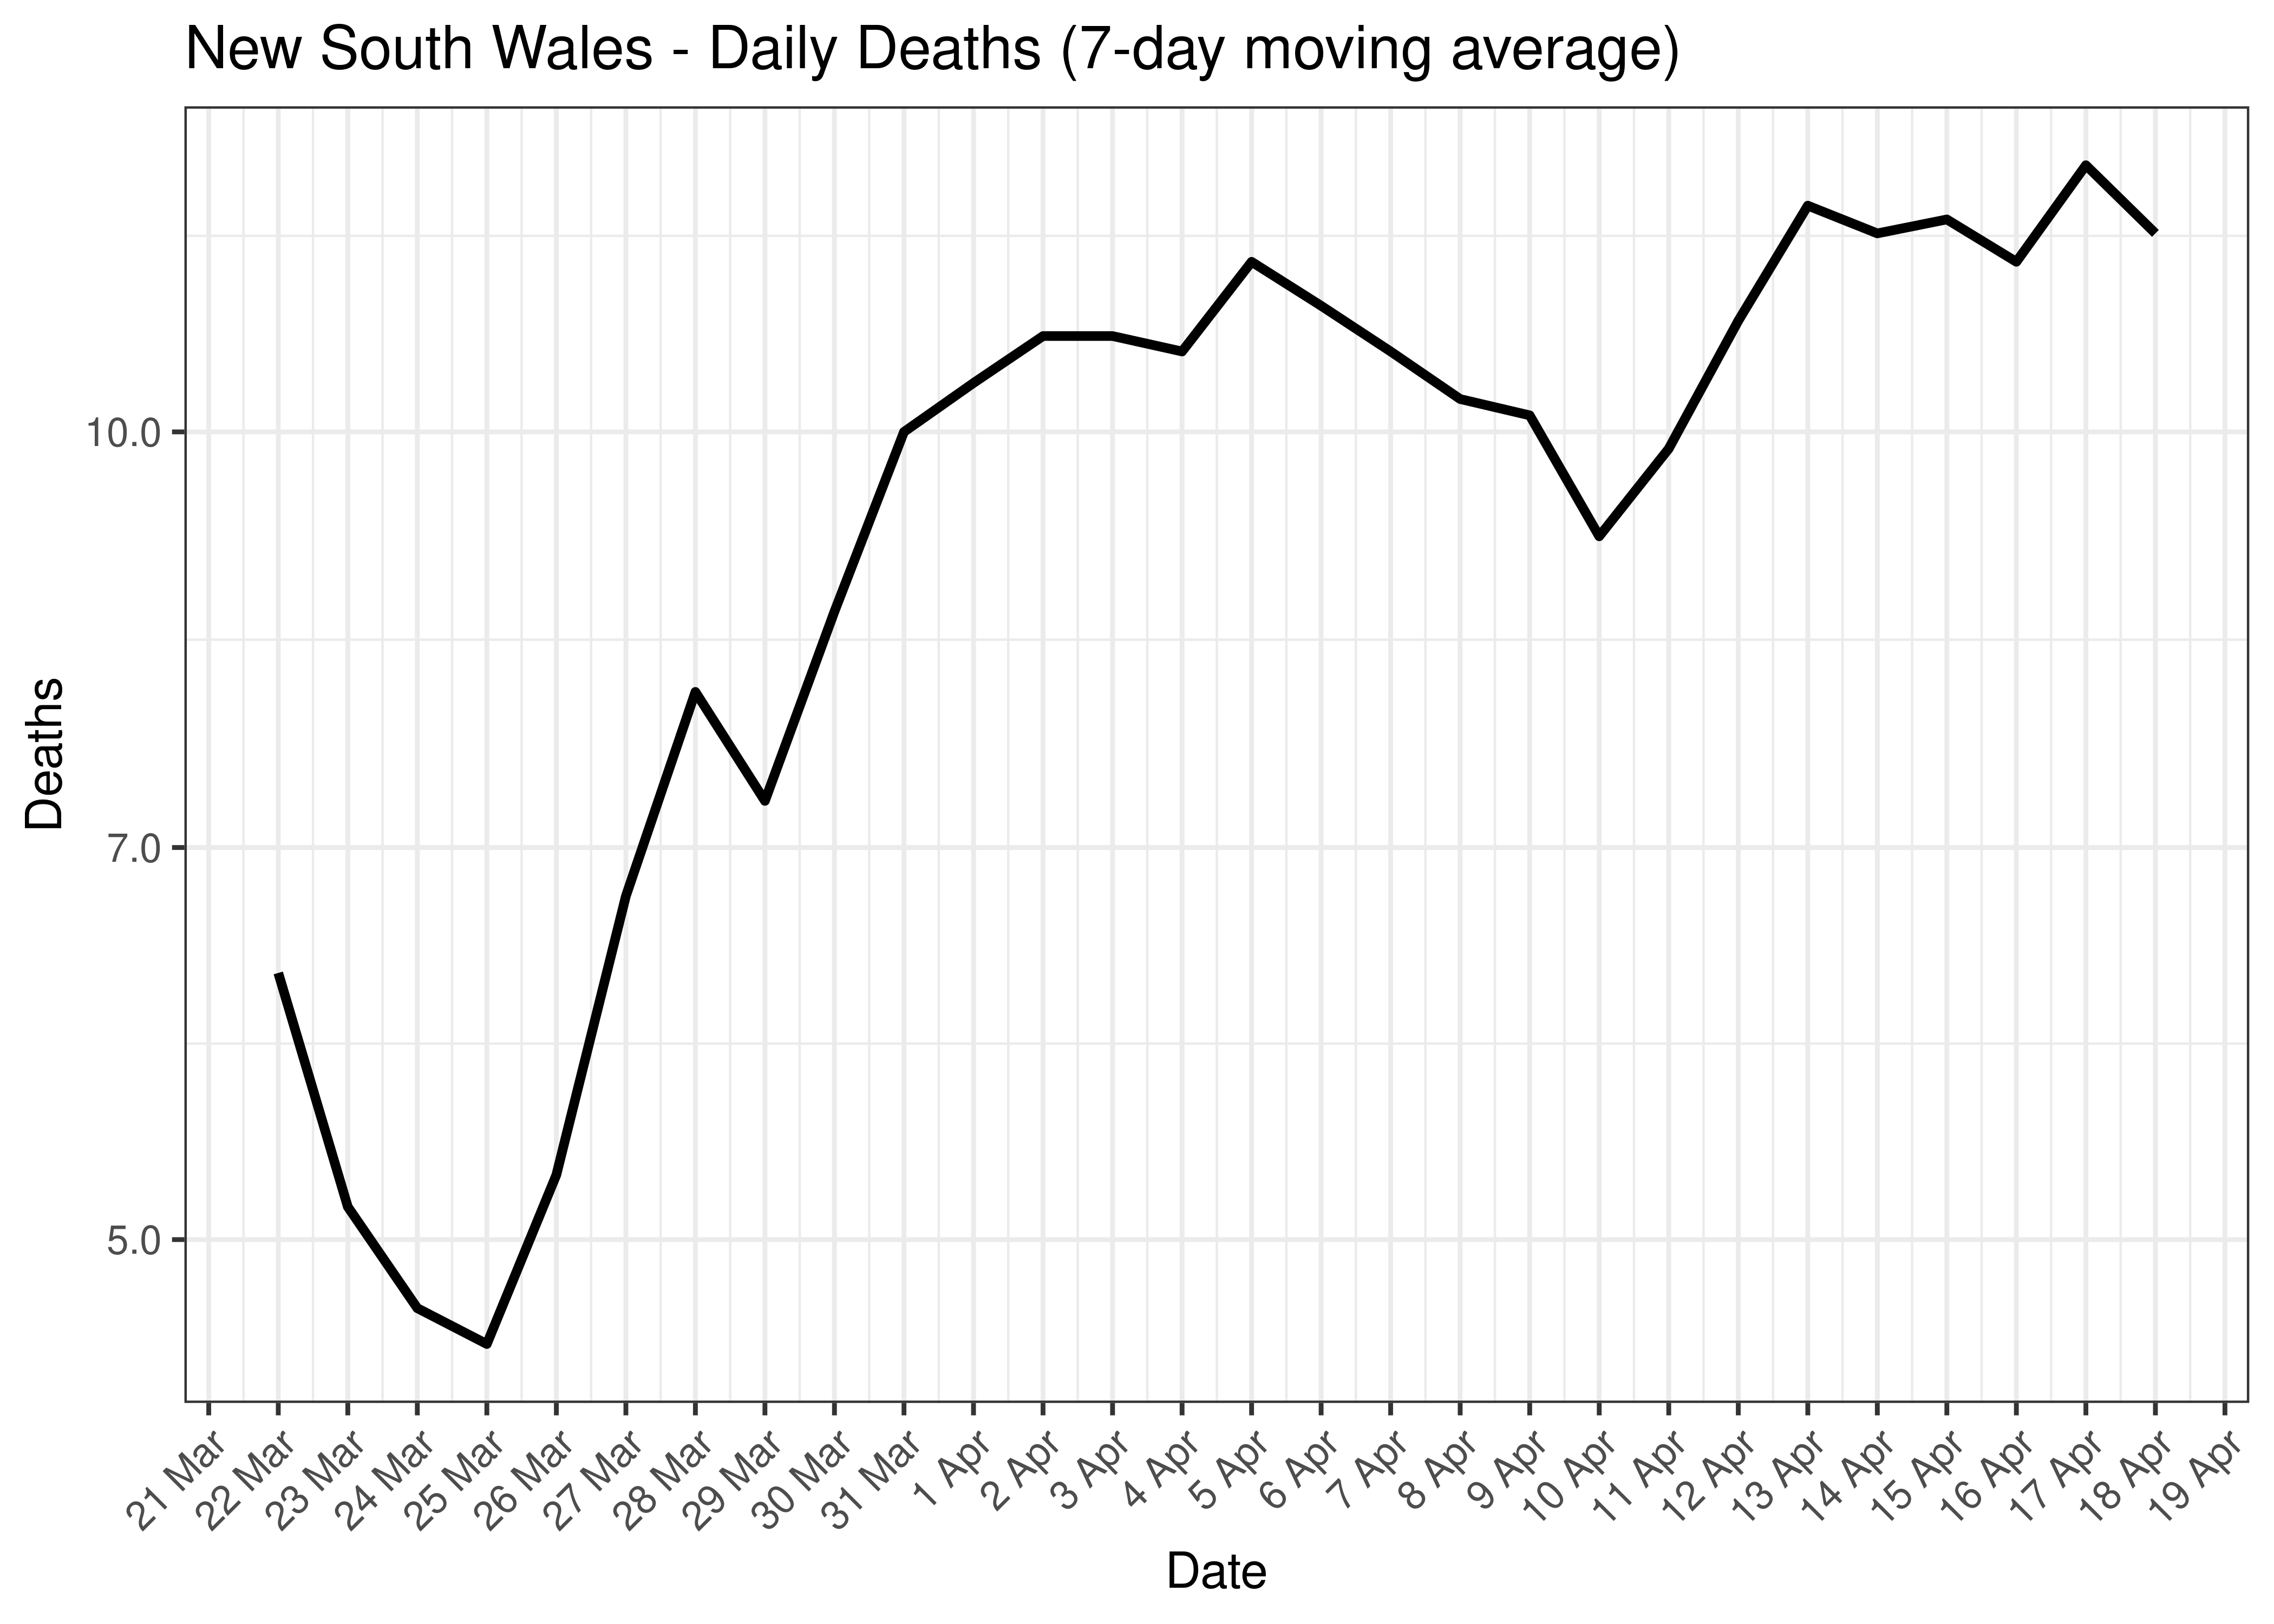 New South Wales - Daily Deaths for Last 30-days (7-day moving average)